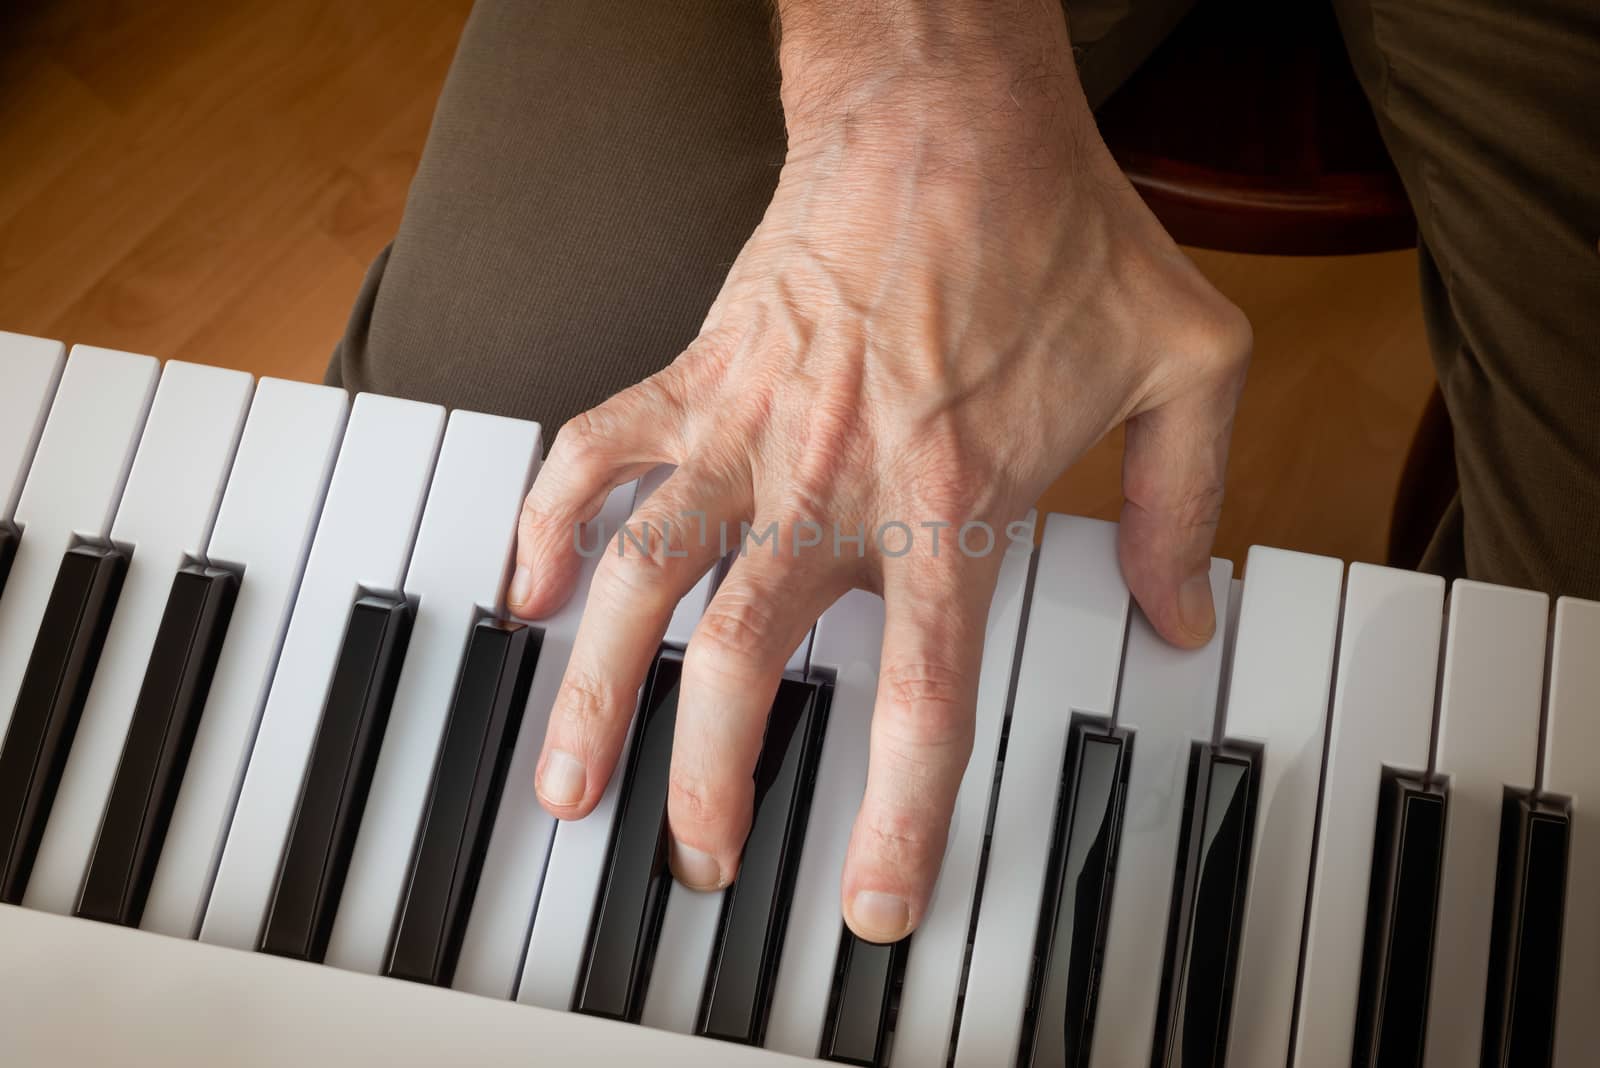 Hand of a musician playing a music keyboard by MaxalTamor